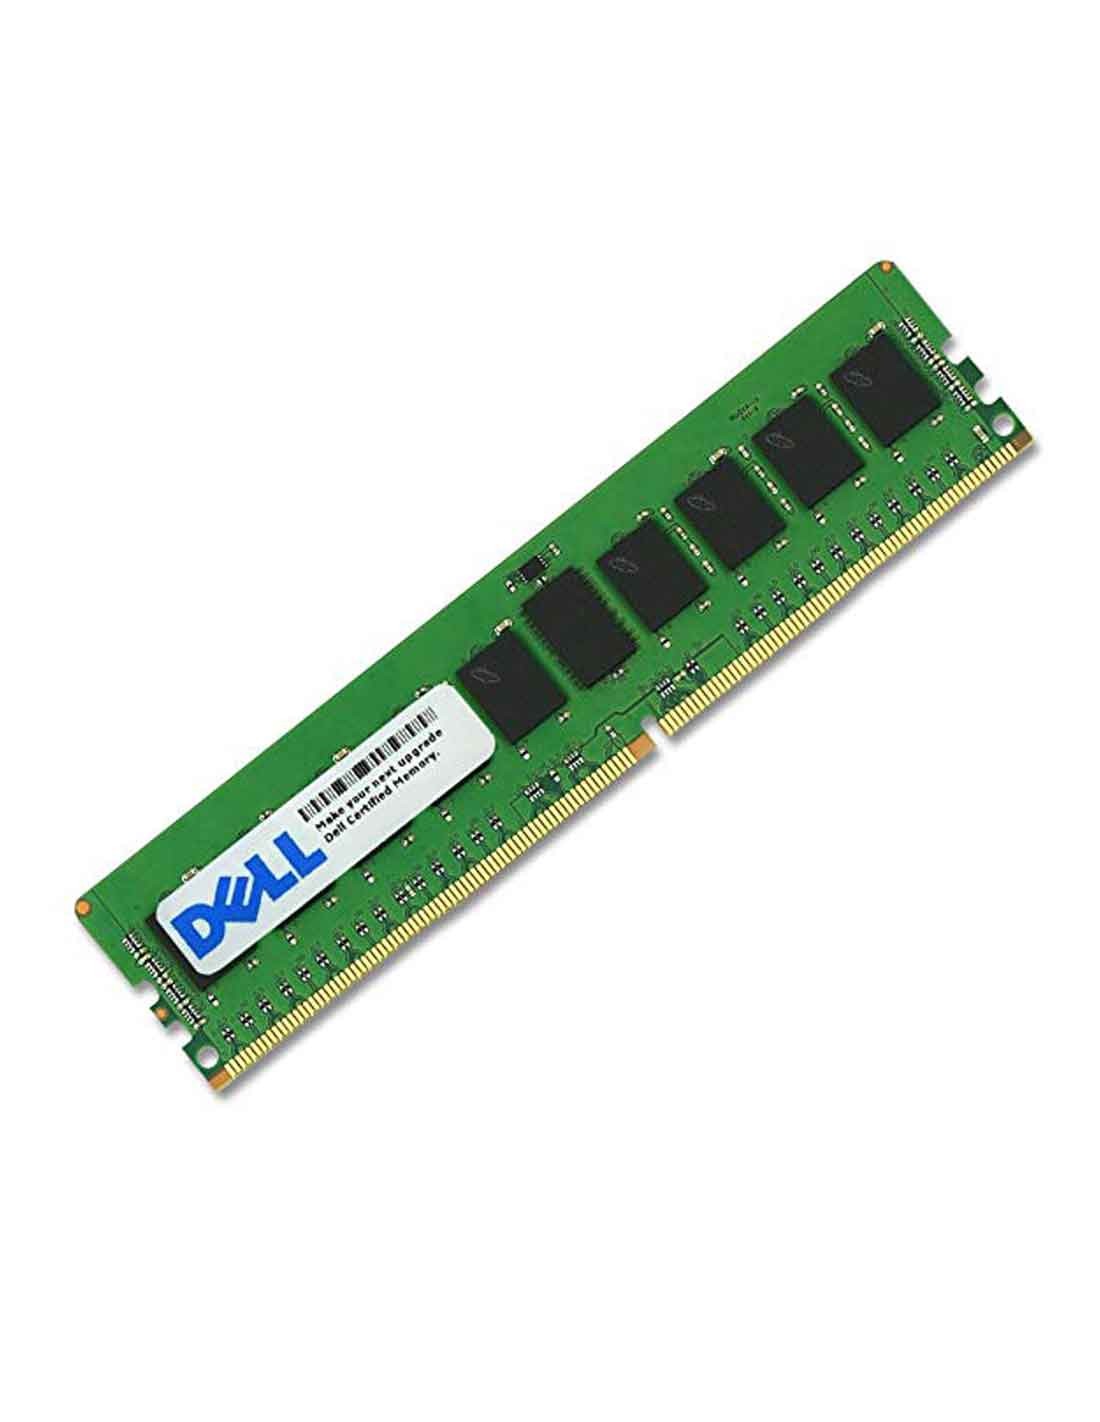 Dell Memory Upgrade 8GB 2Rx8 DDR4 RDIMM 2133MHz at a cheap price in Dubai online store RAM yaddas udimm sodimm